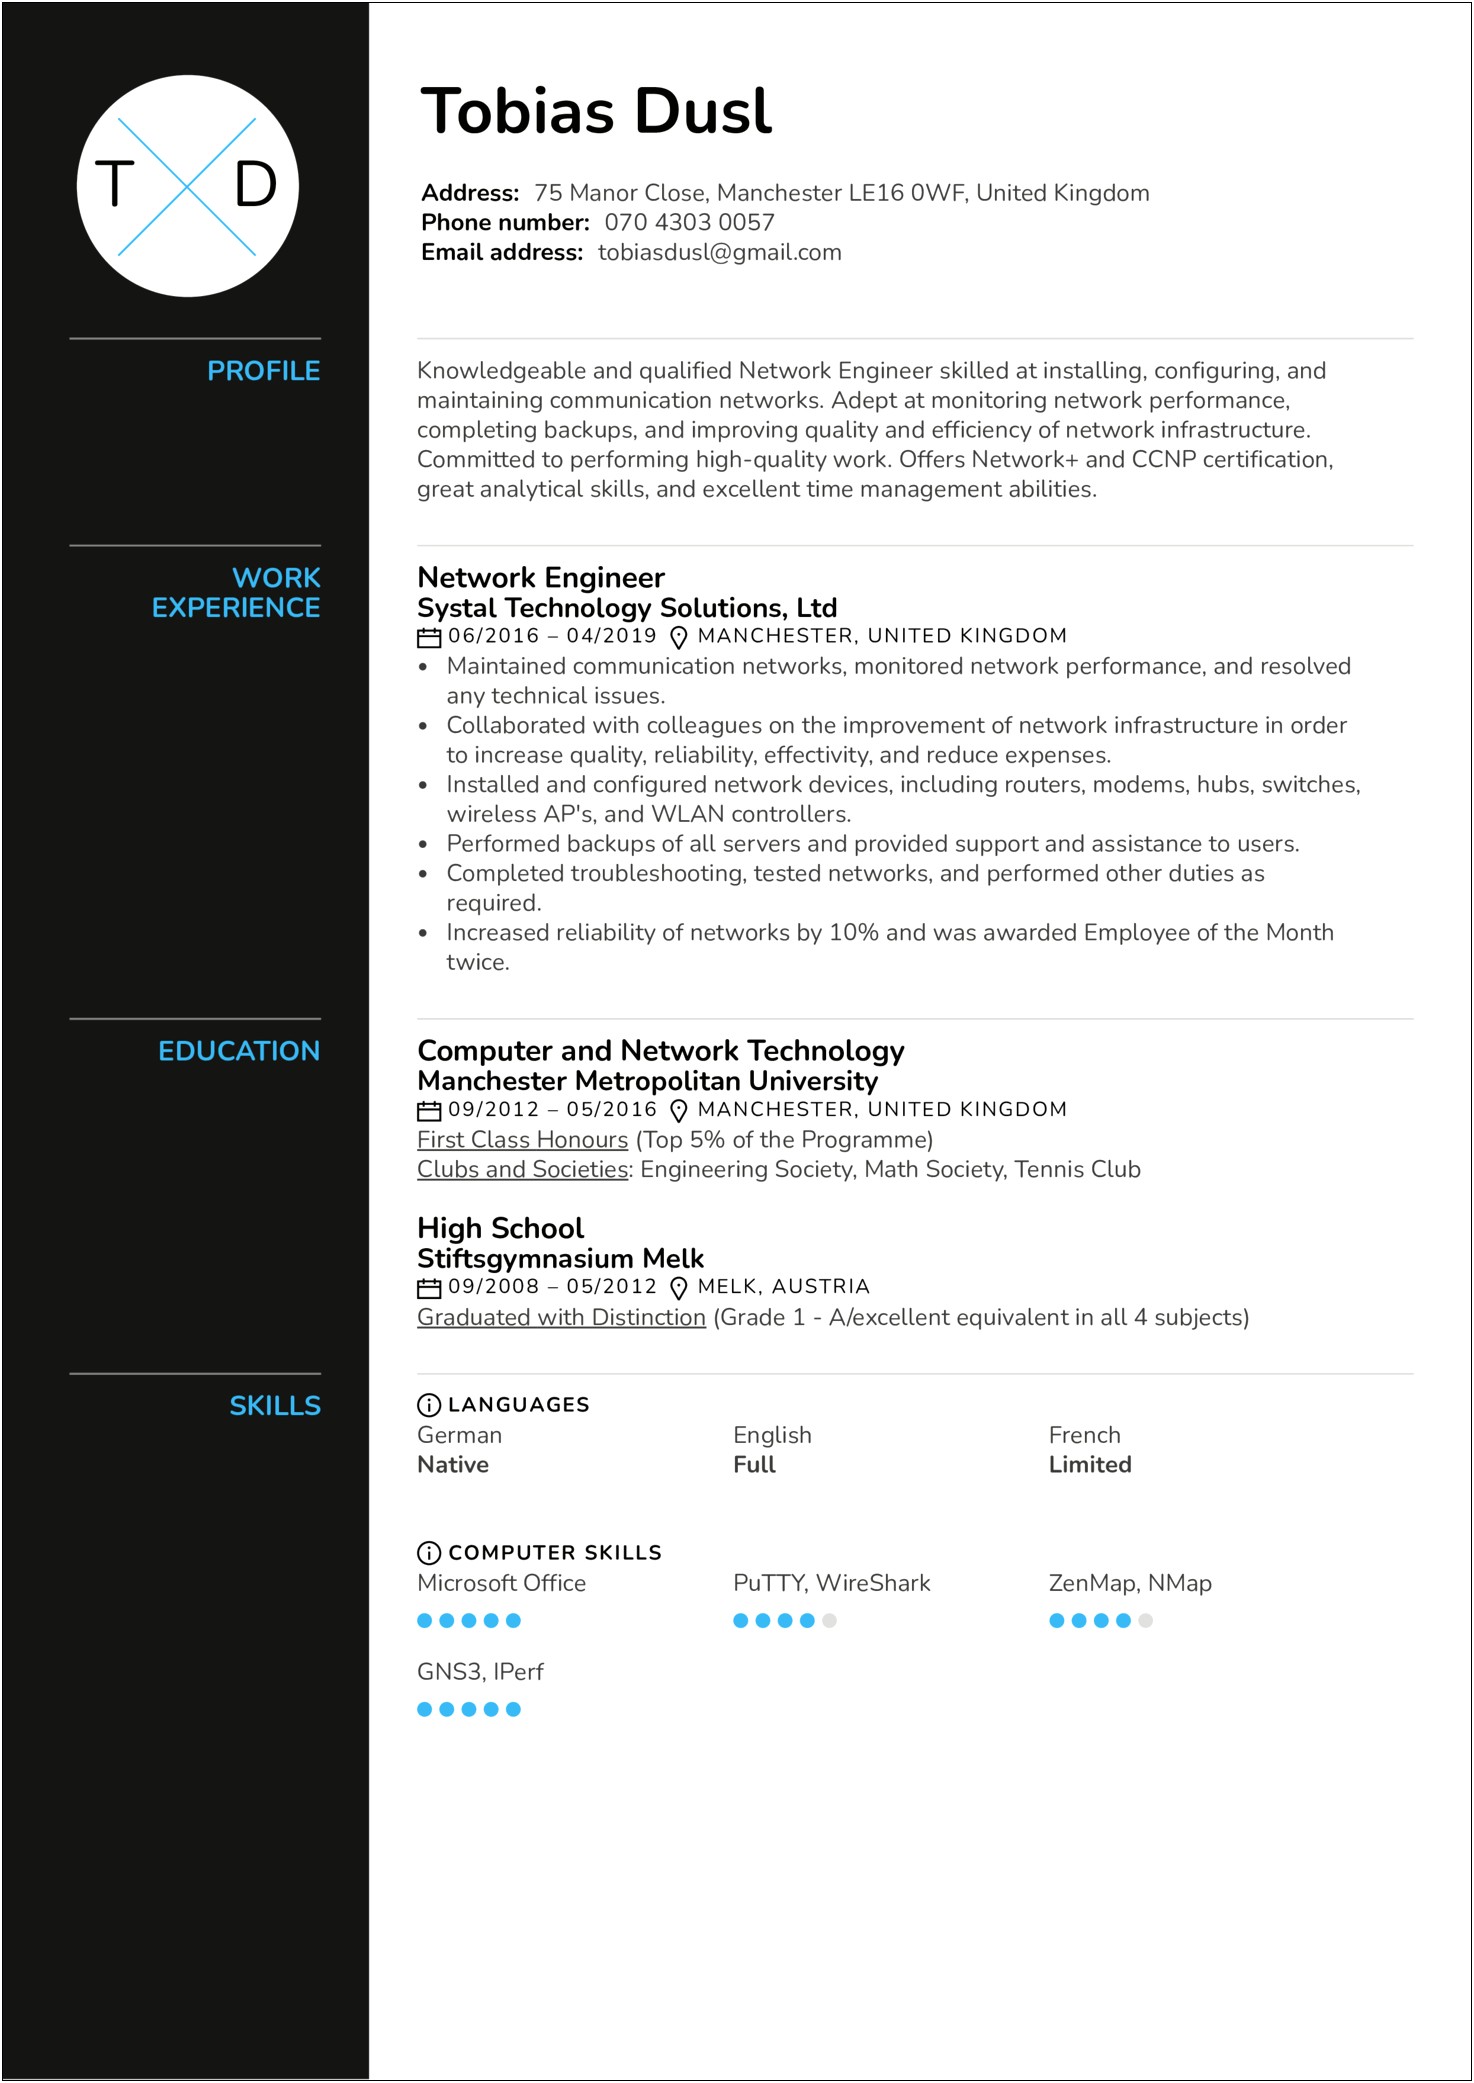 Examples Of Network Engineer Titles On Resumes